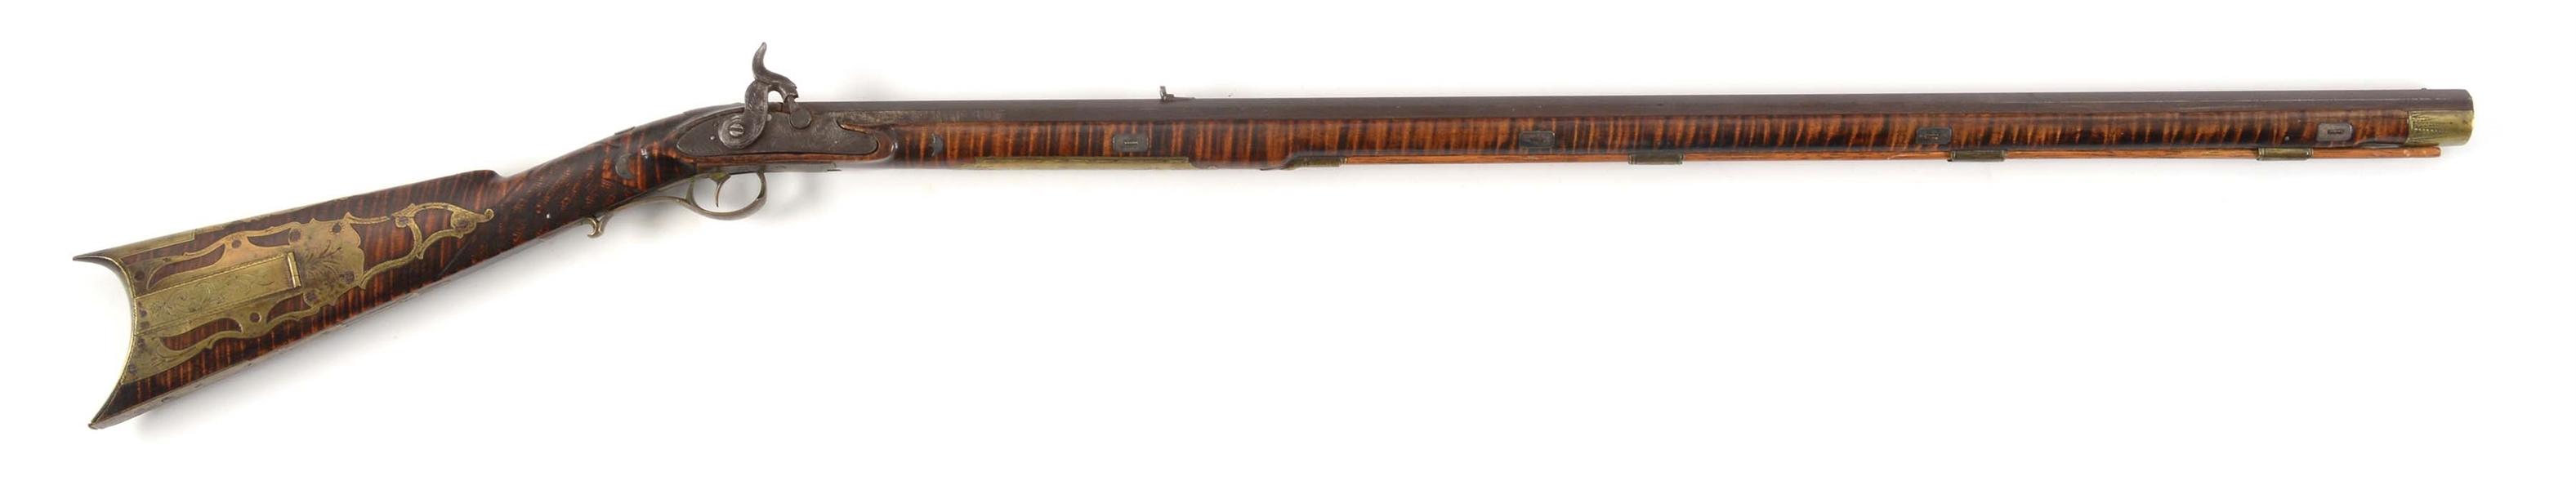 (A) UNMARKED KENTUCKY STYLE PERCUSSION RIFLE.